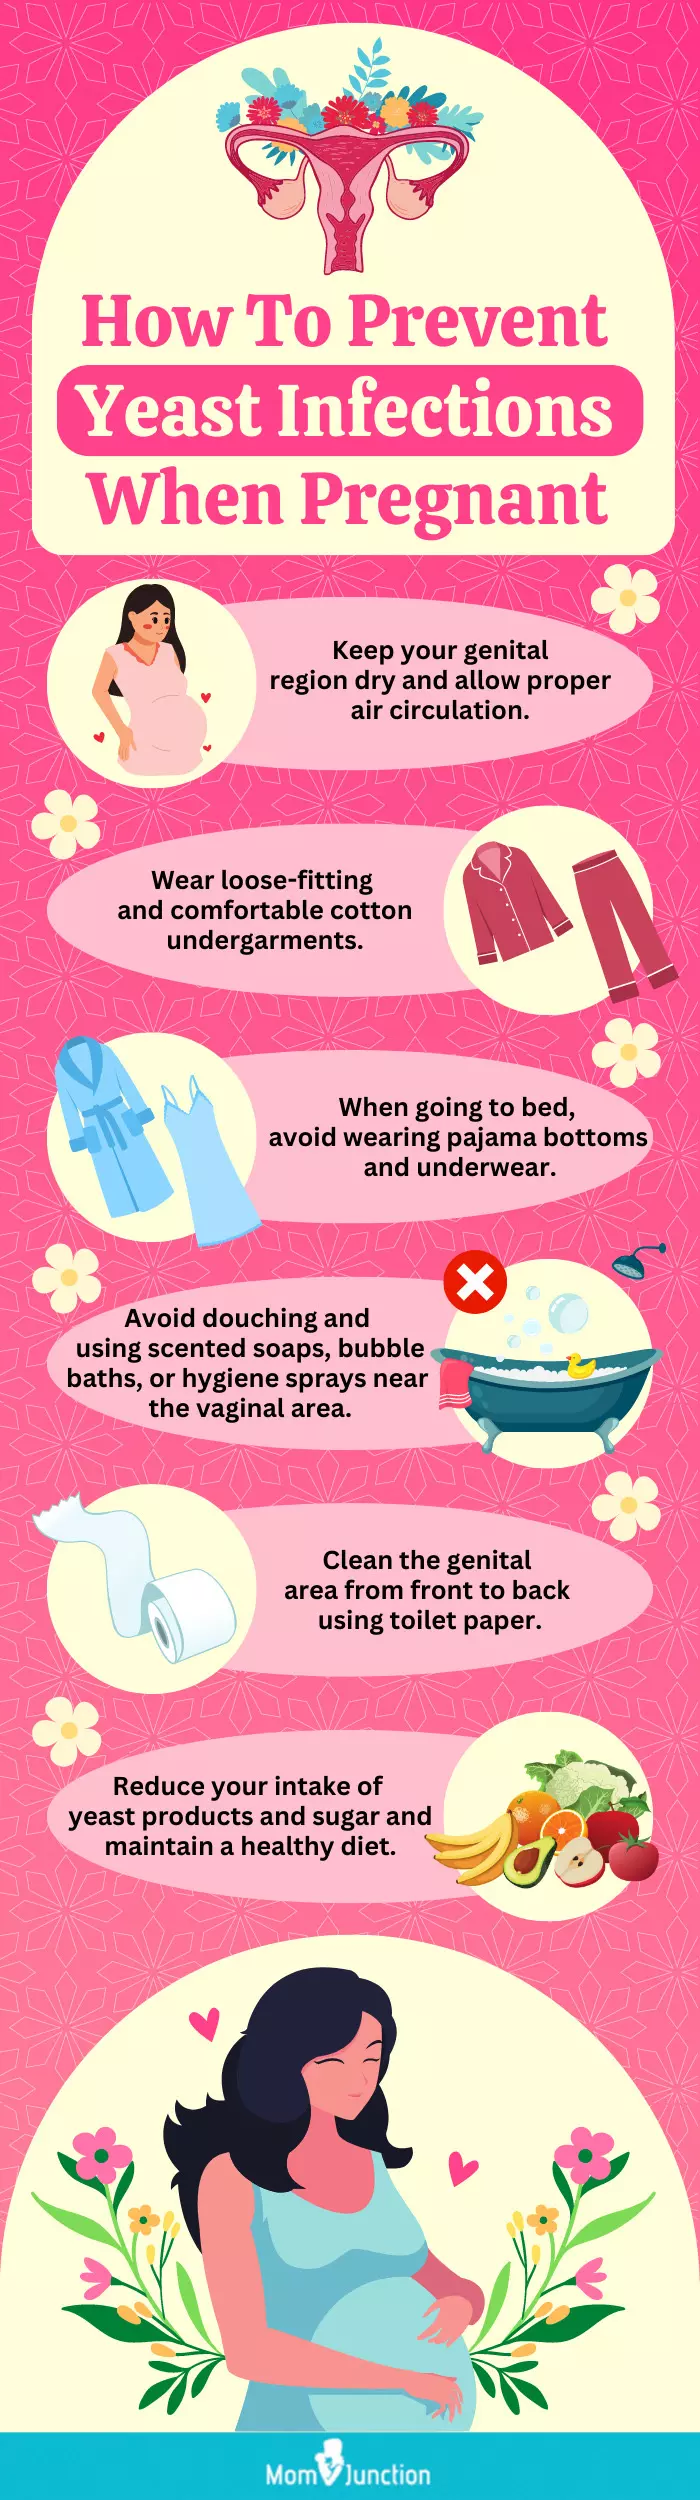 helpful tips to prevent yeast infections in pregnancy (infographic)